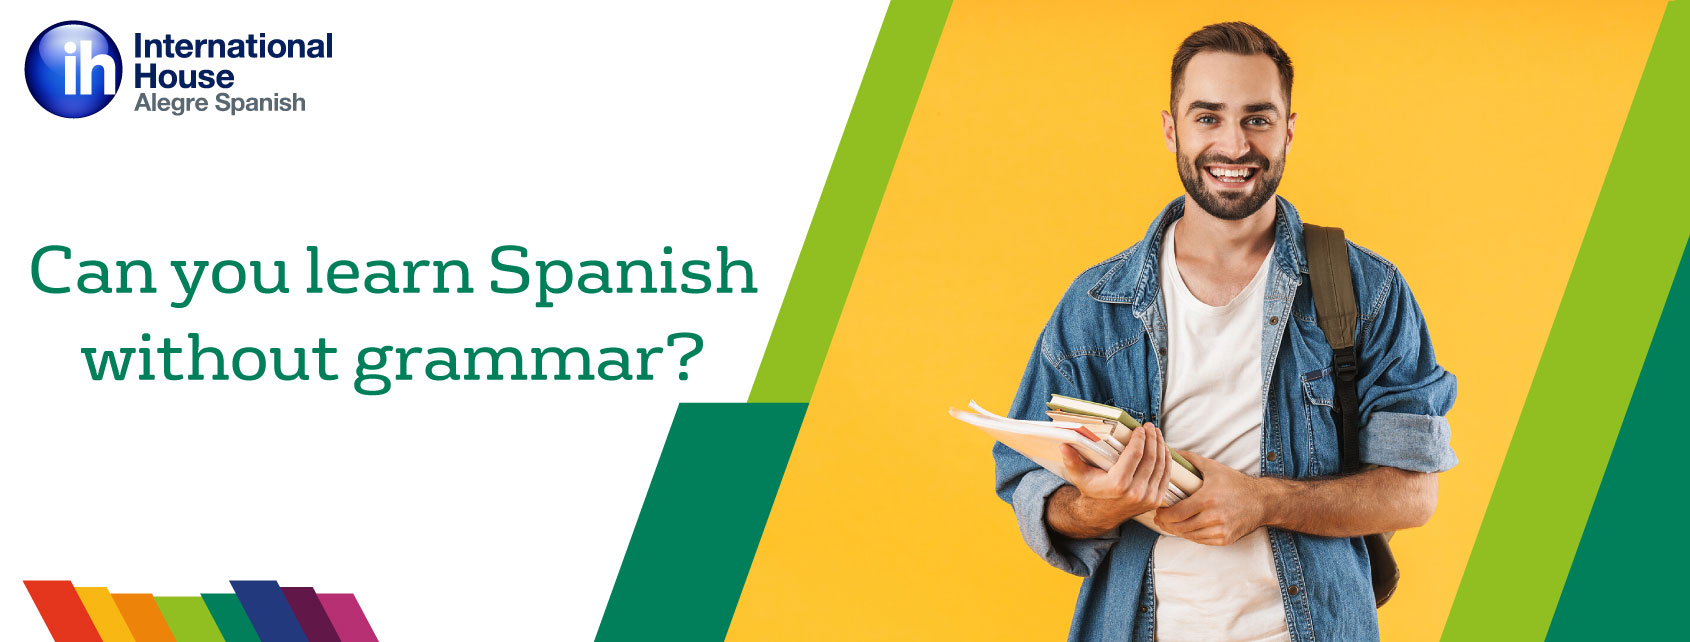 Can you learn Spanish without grammar